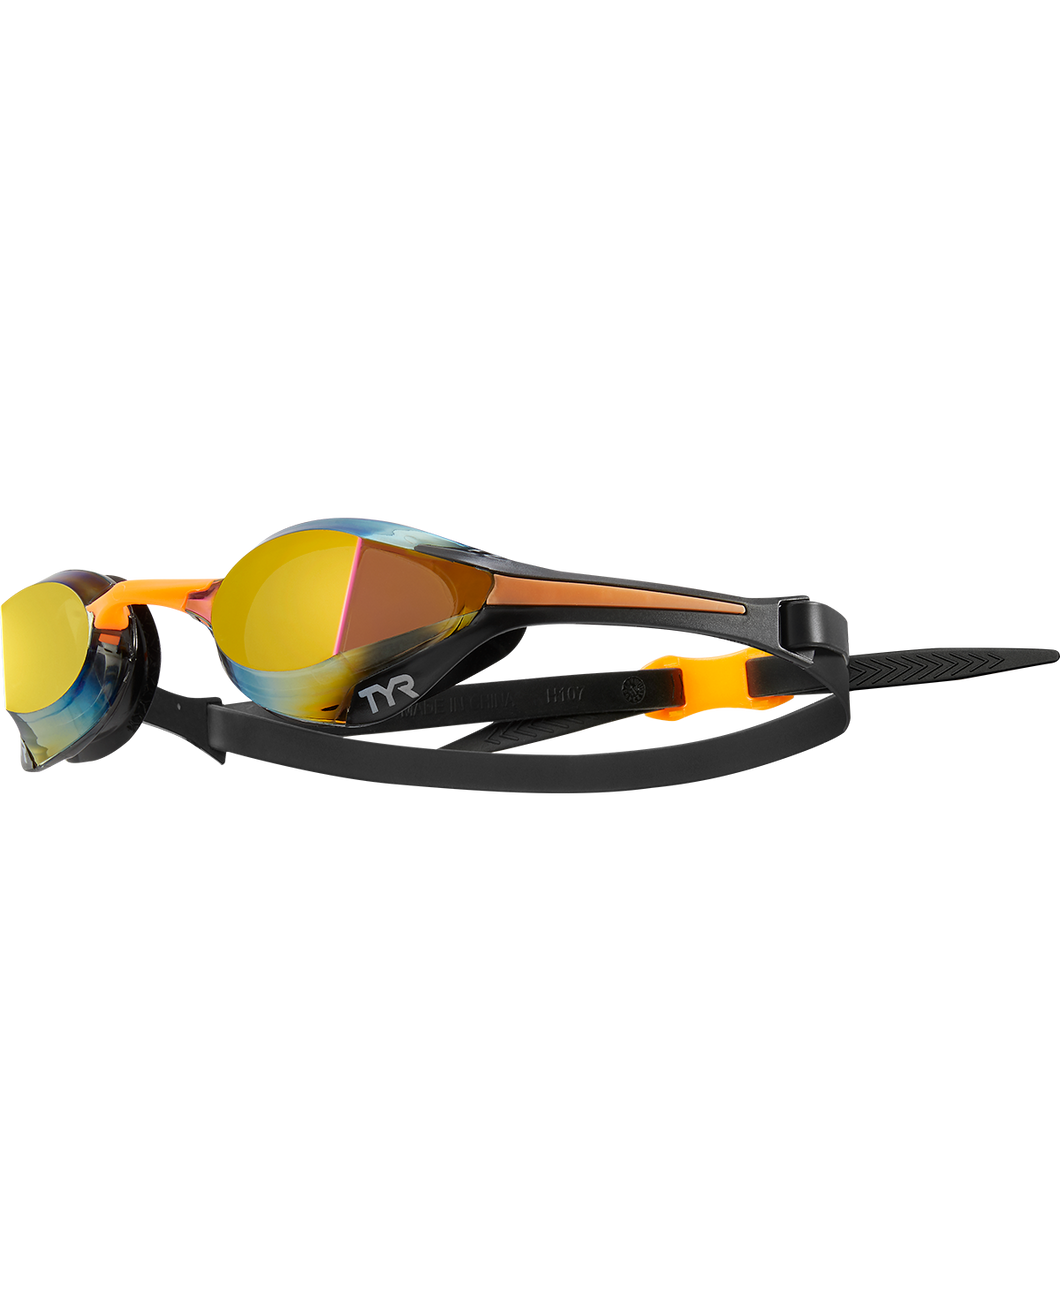 TYR TRACER X ELITE MIRRORED RACING GOGGLE - GOLD/ORANGE